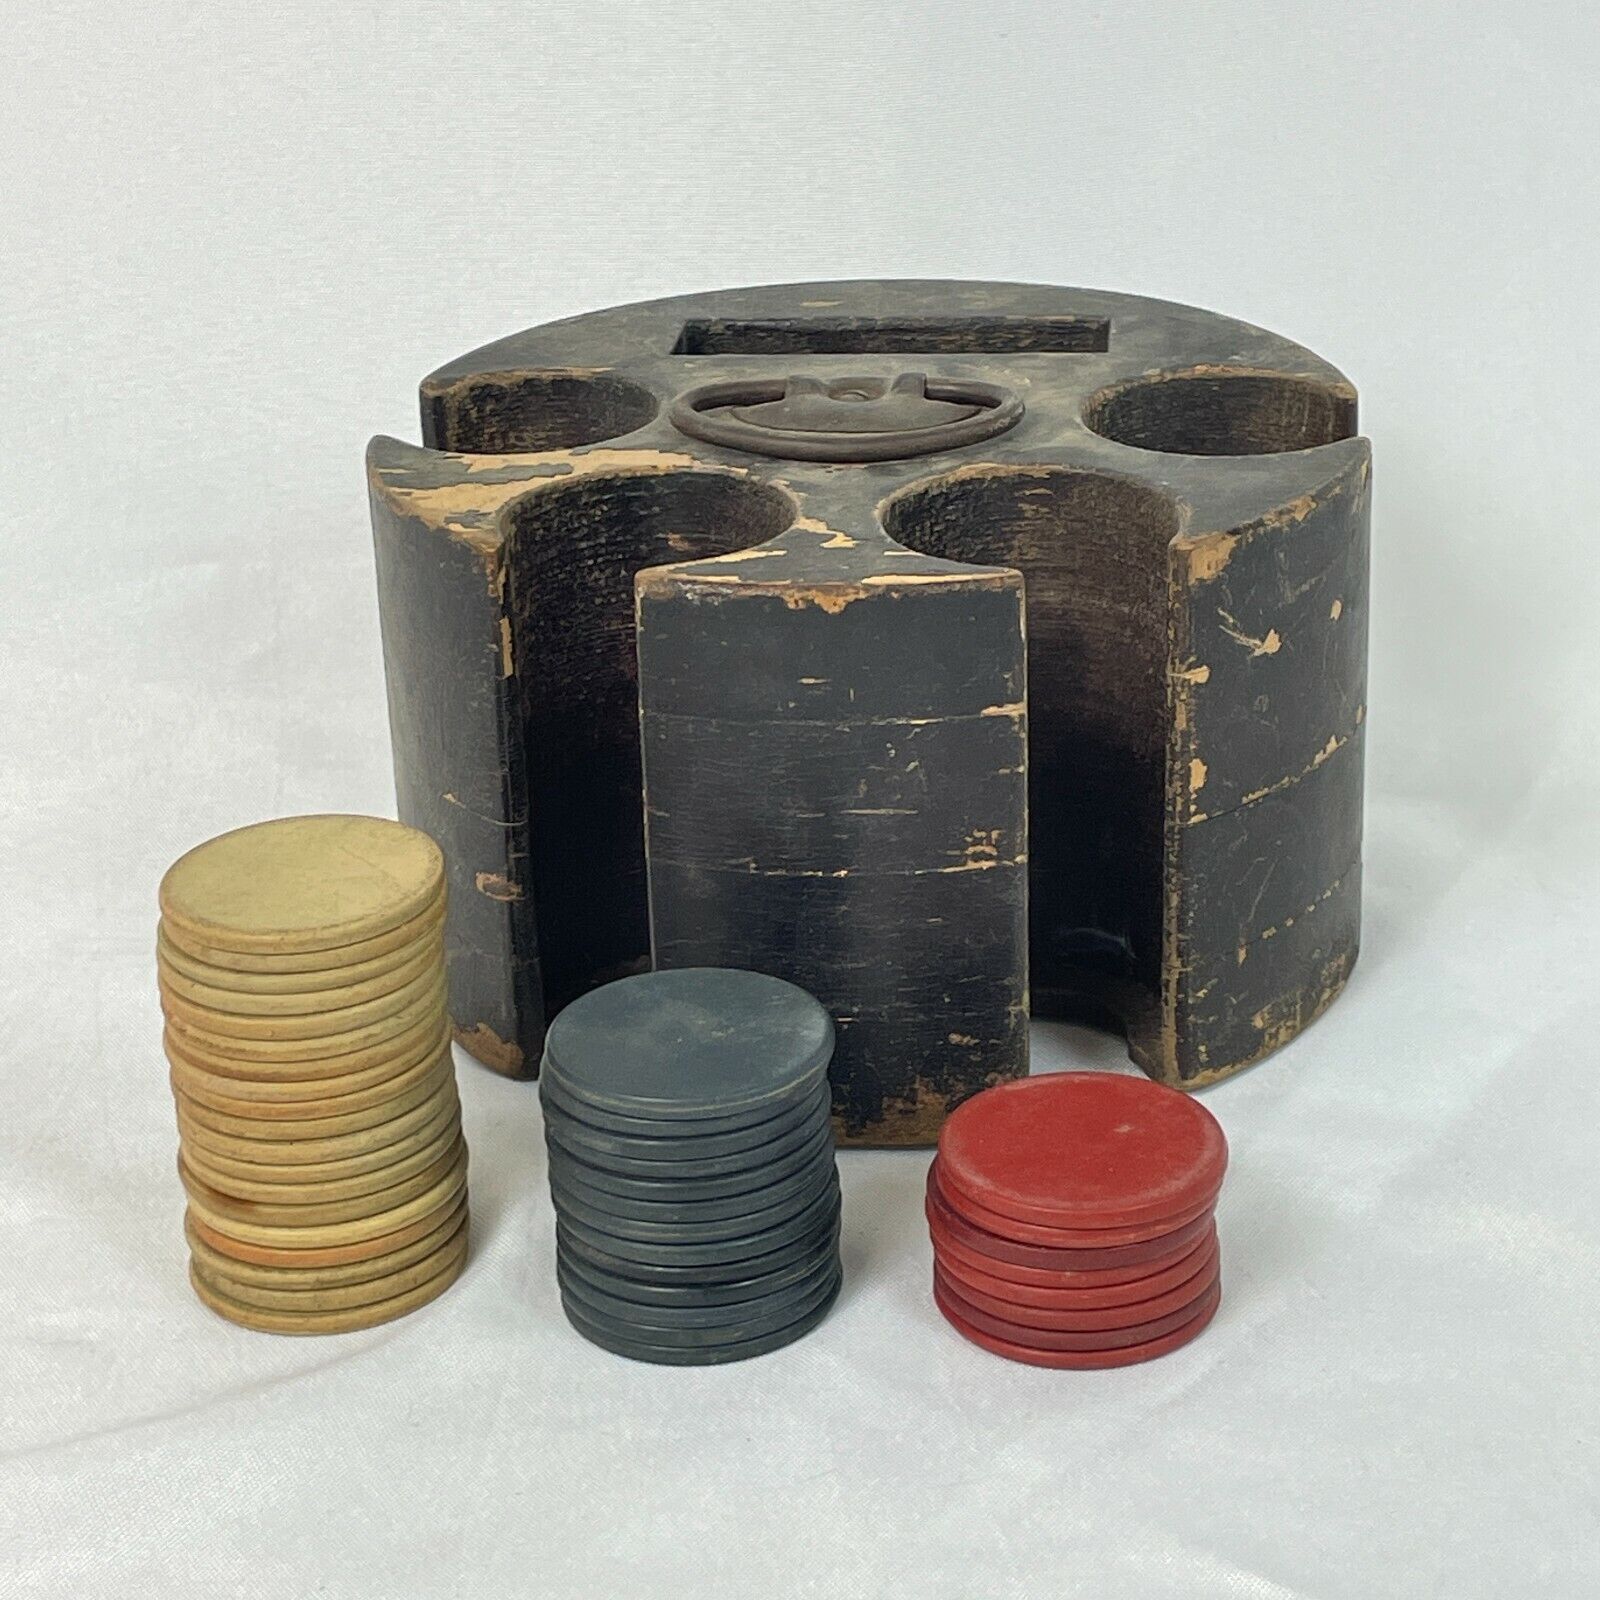 ANTIQUE WOODEN ROUND POKER CHIP CADDY & 40 CLAY PLAIN POKER CHIPS RED WHITE BLUE